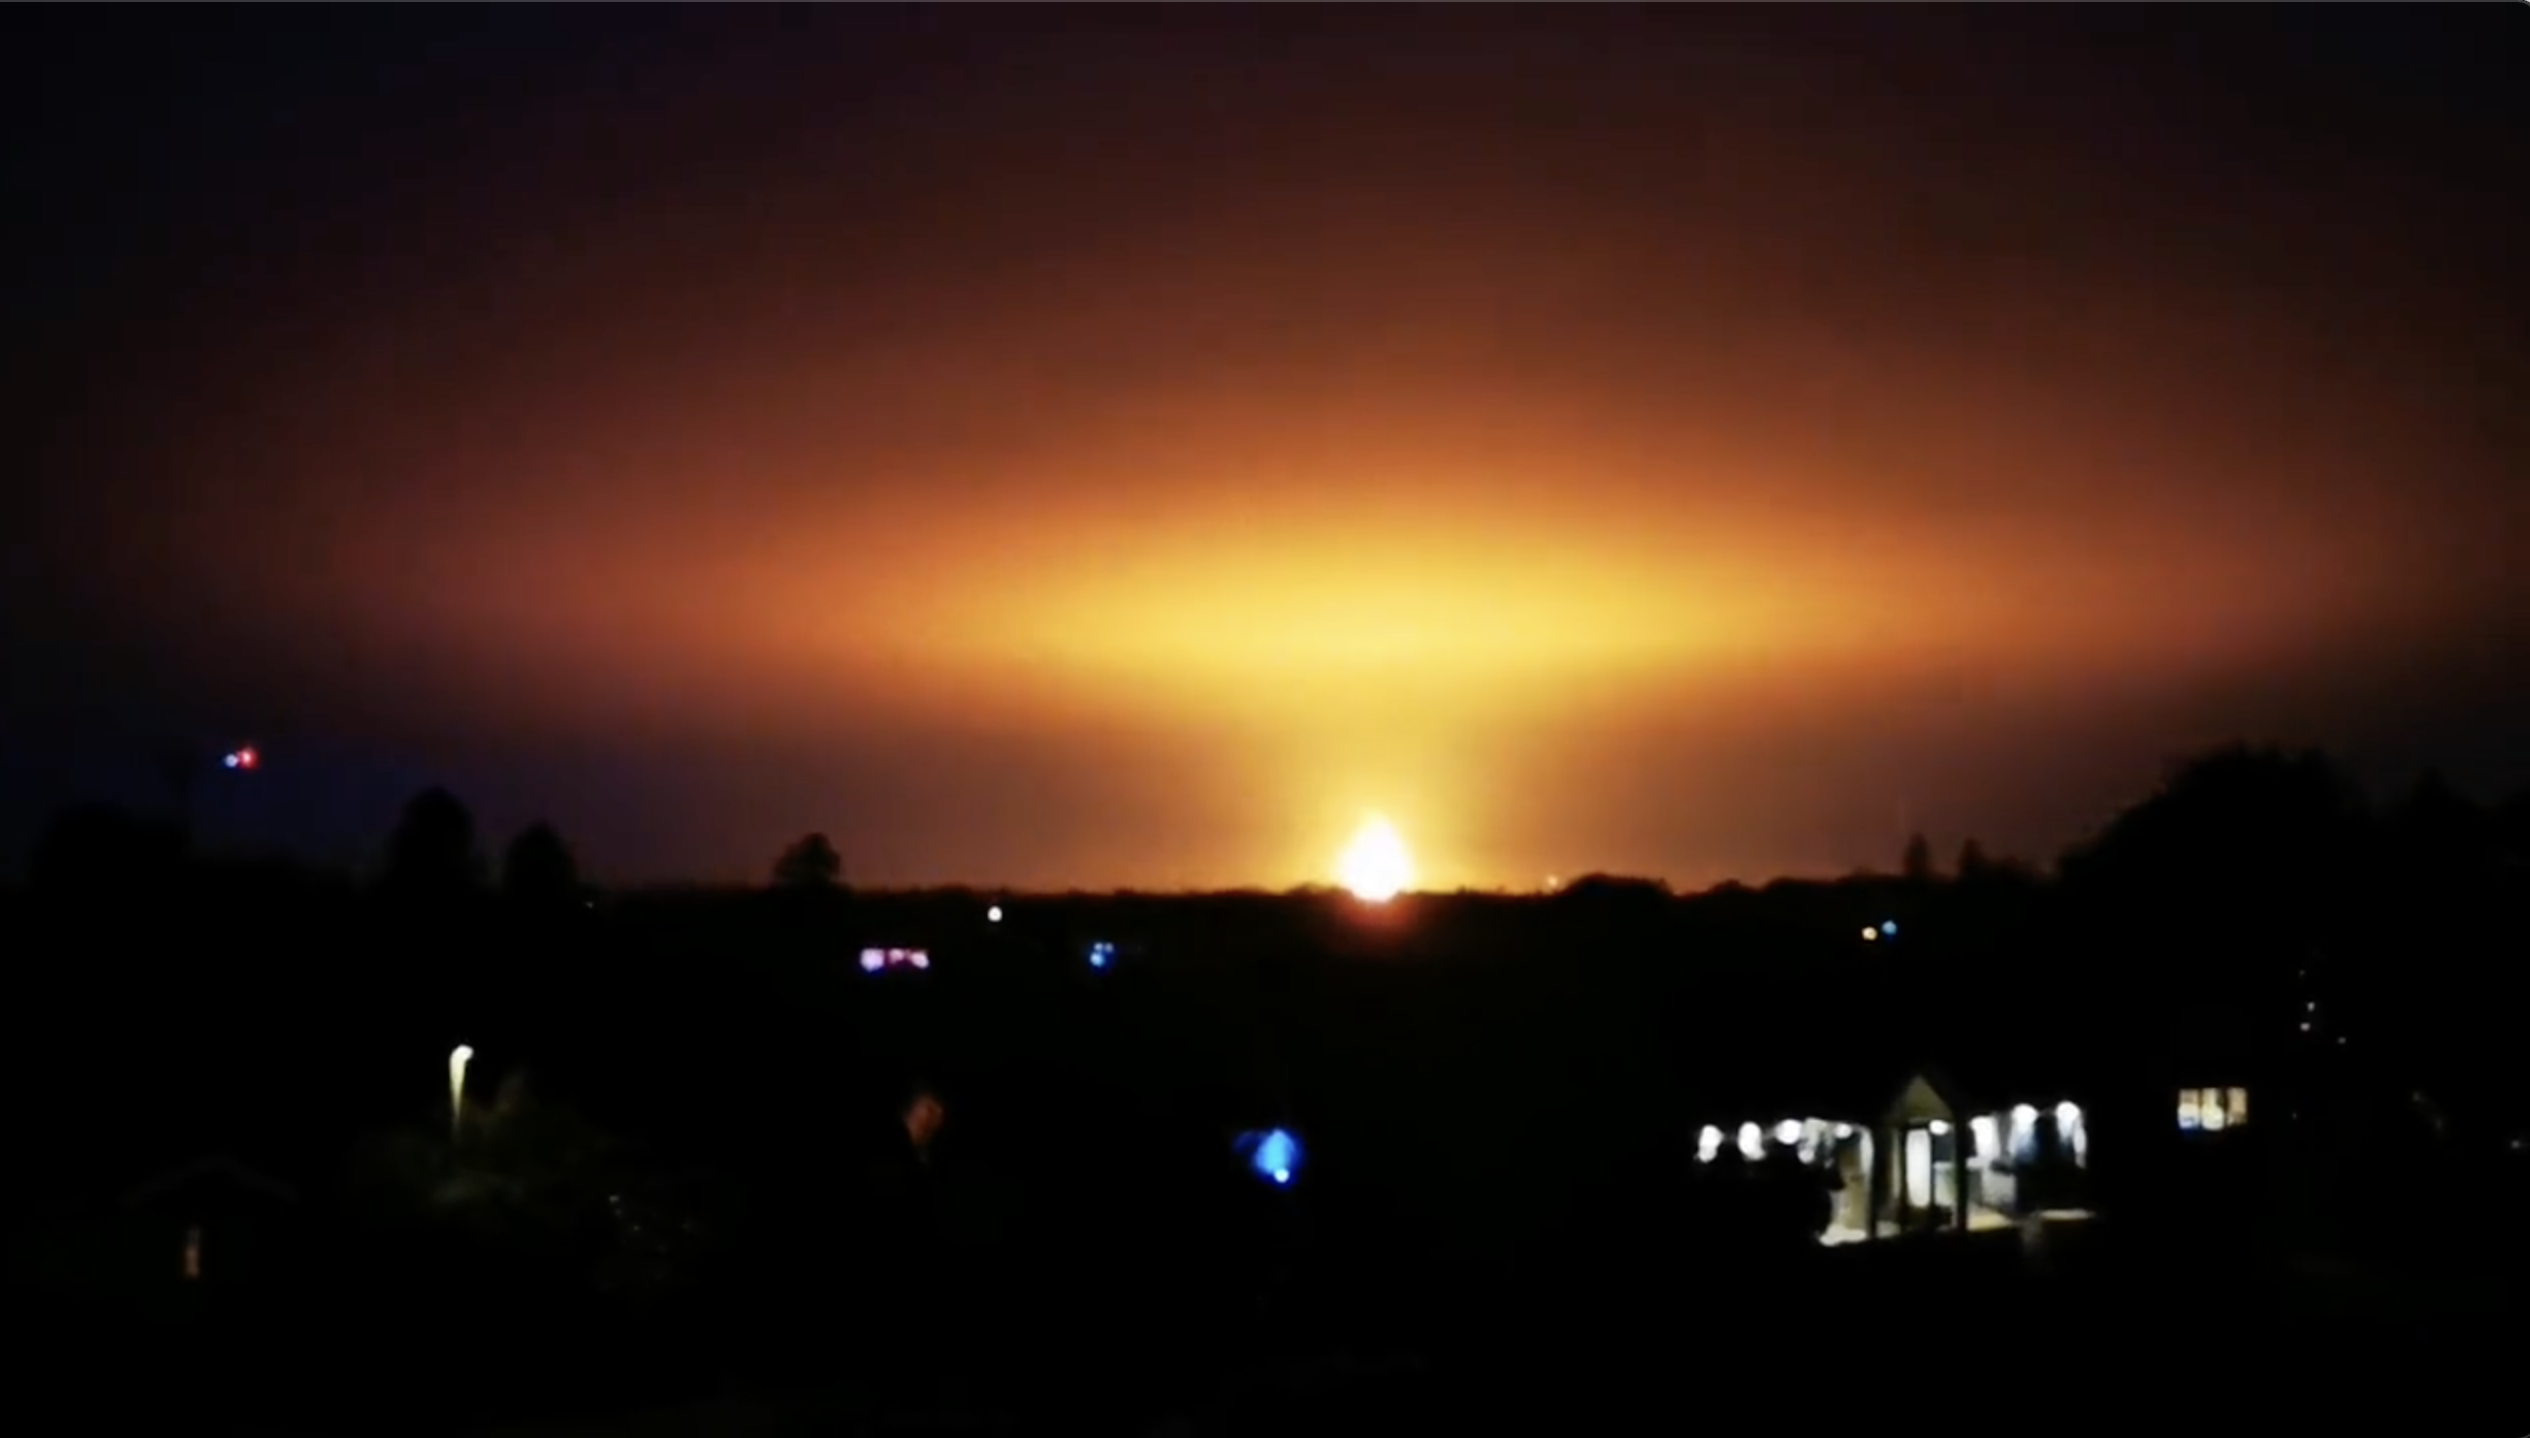 BREAKING: Huge Explosion In Oxford, Looks Like a Nuclear Bomb